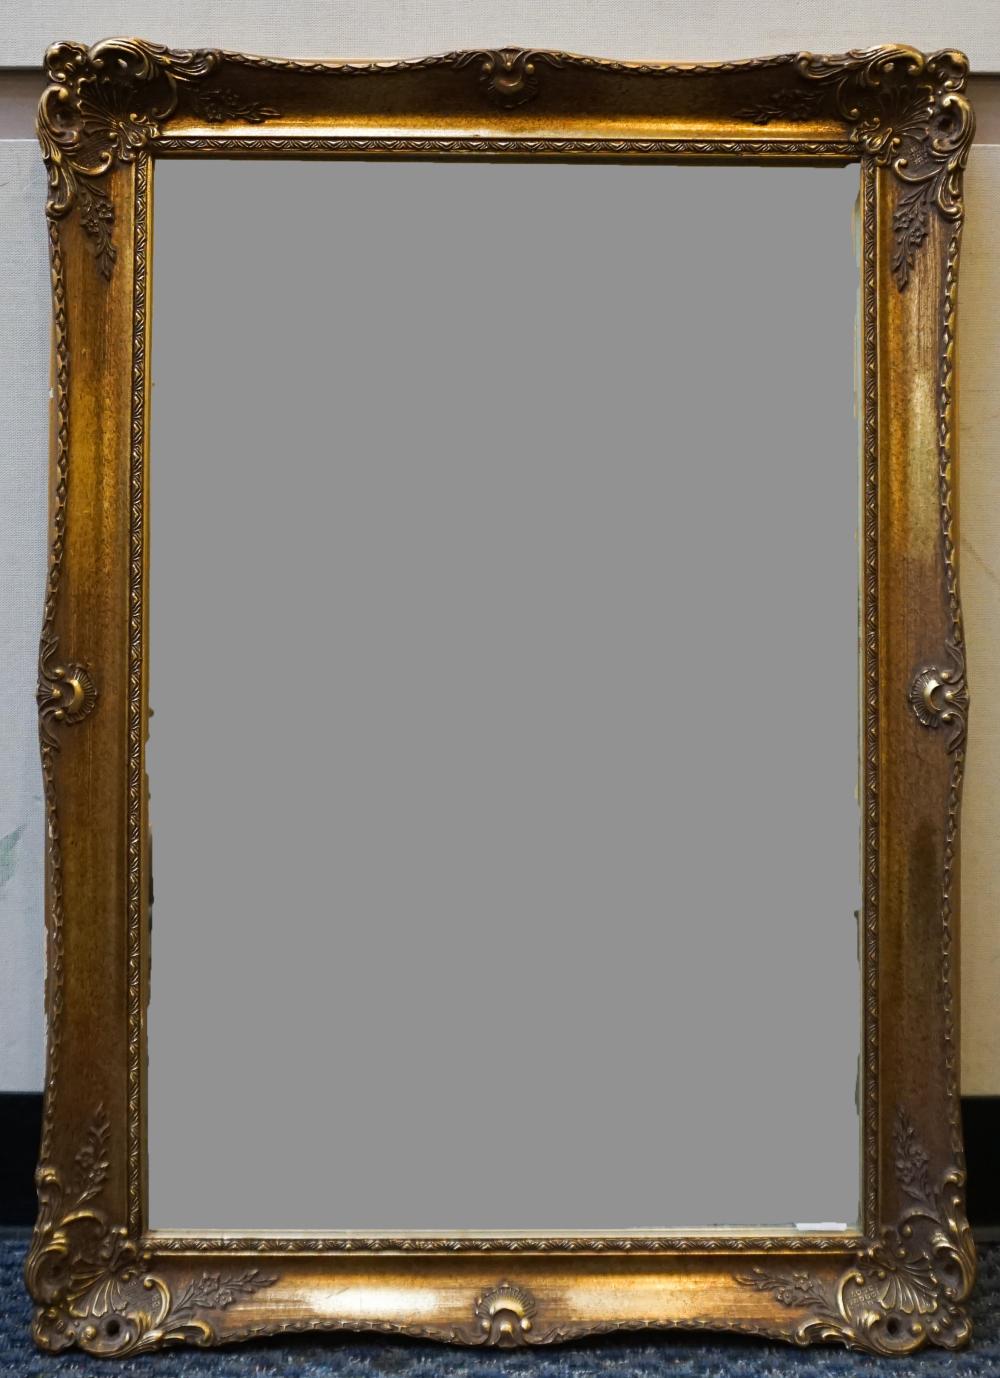 LOUIS XV STYLE GILT DECORATED COMPOSITION